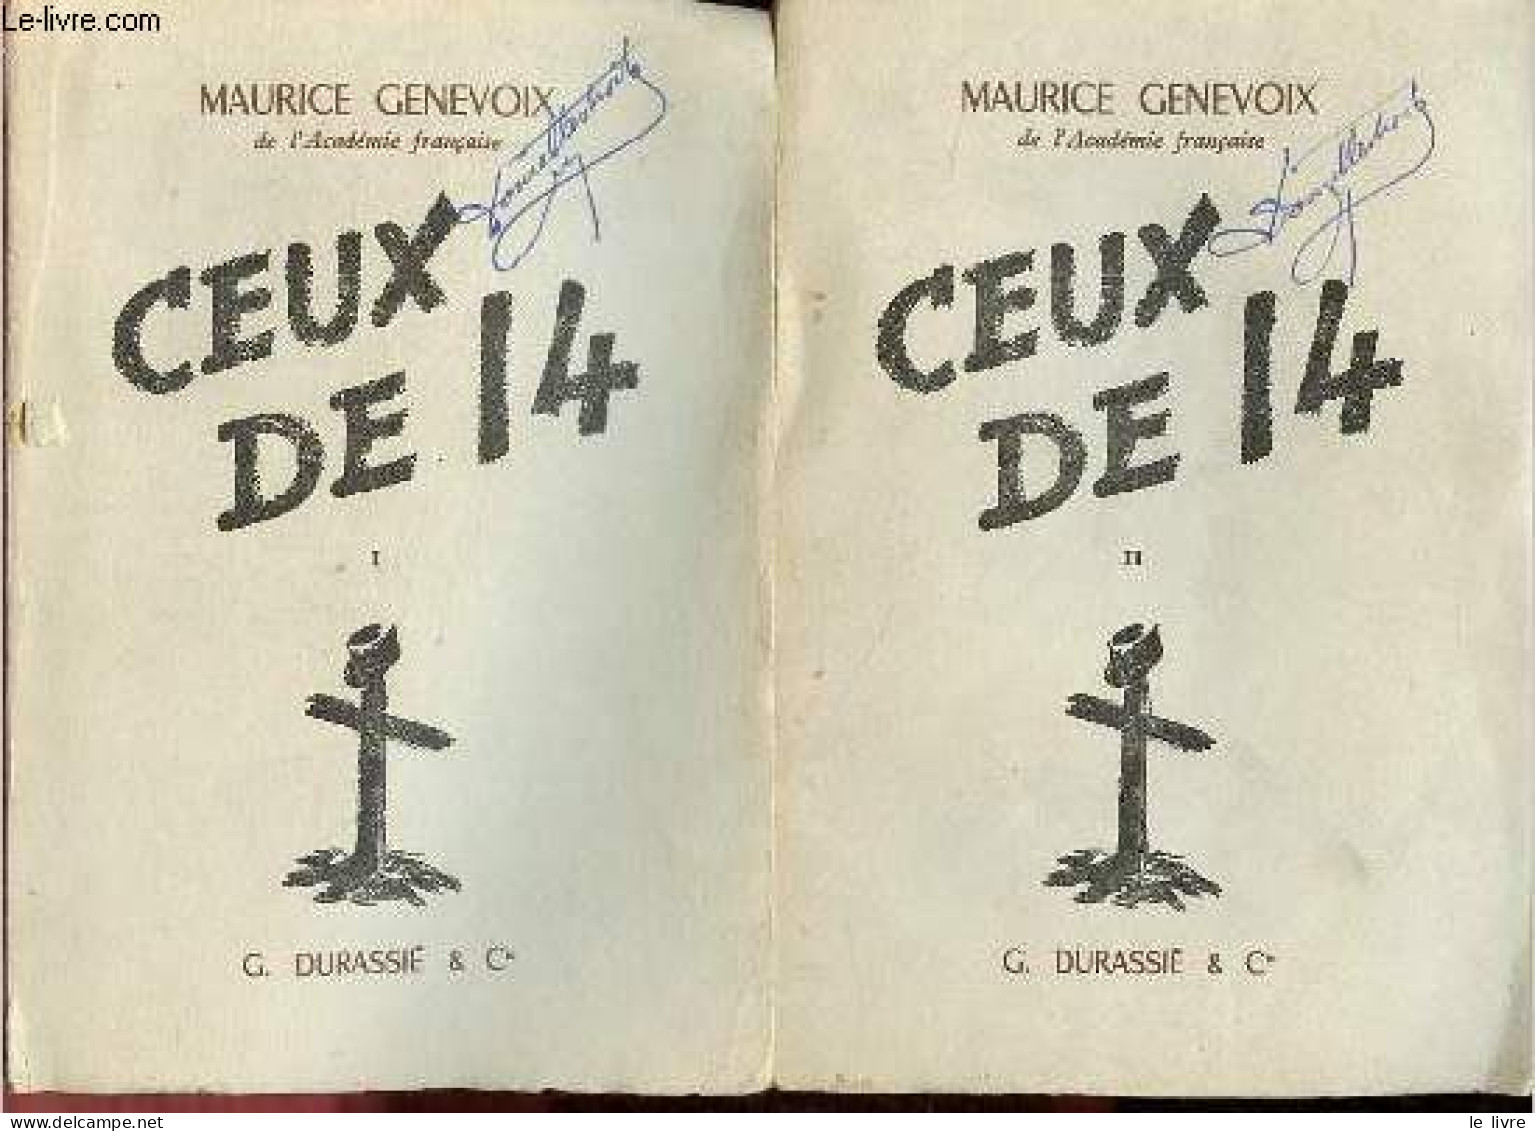 Ceux De 14 - Tome 1 + Tome 2 (2 Volumes). - Genevoix Maurice - 1953 - Weltkrieg 1914-18